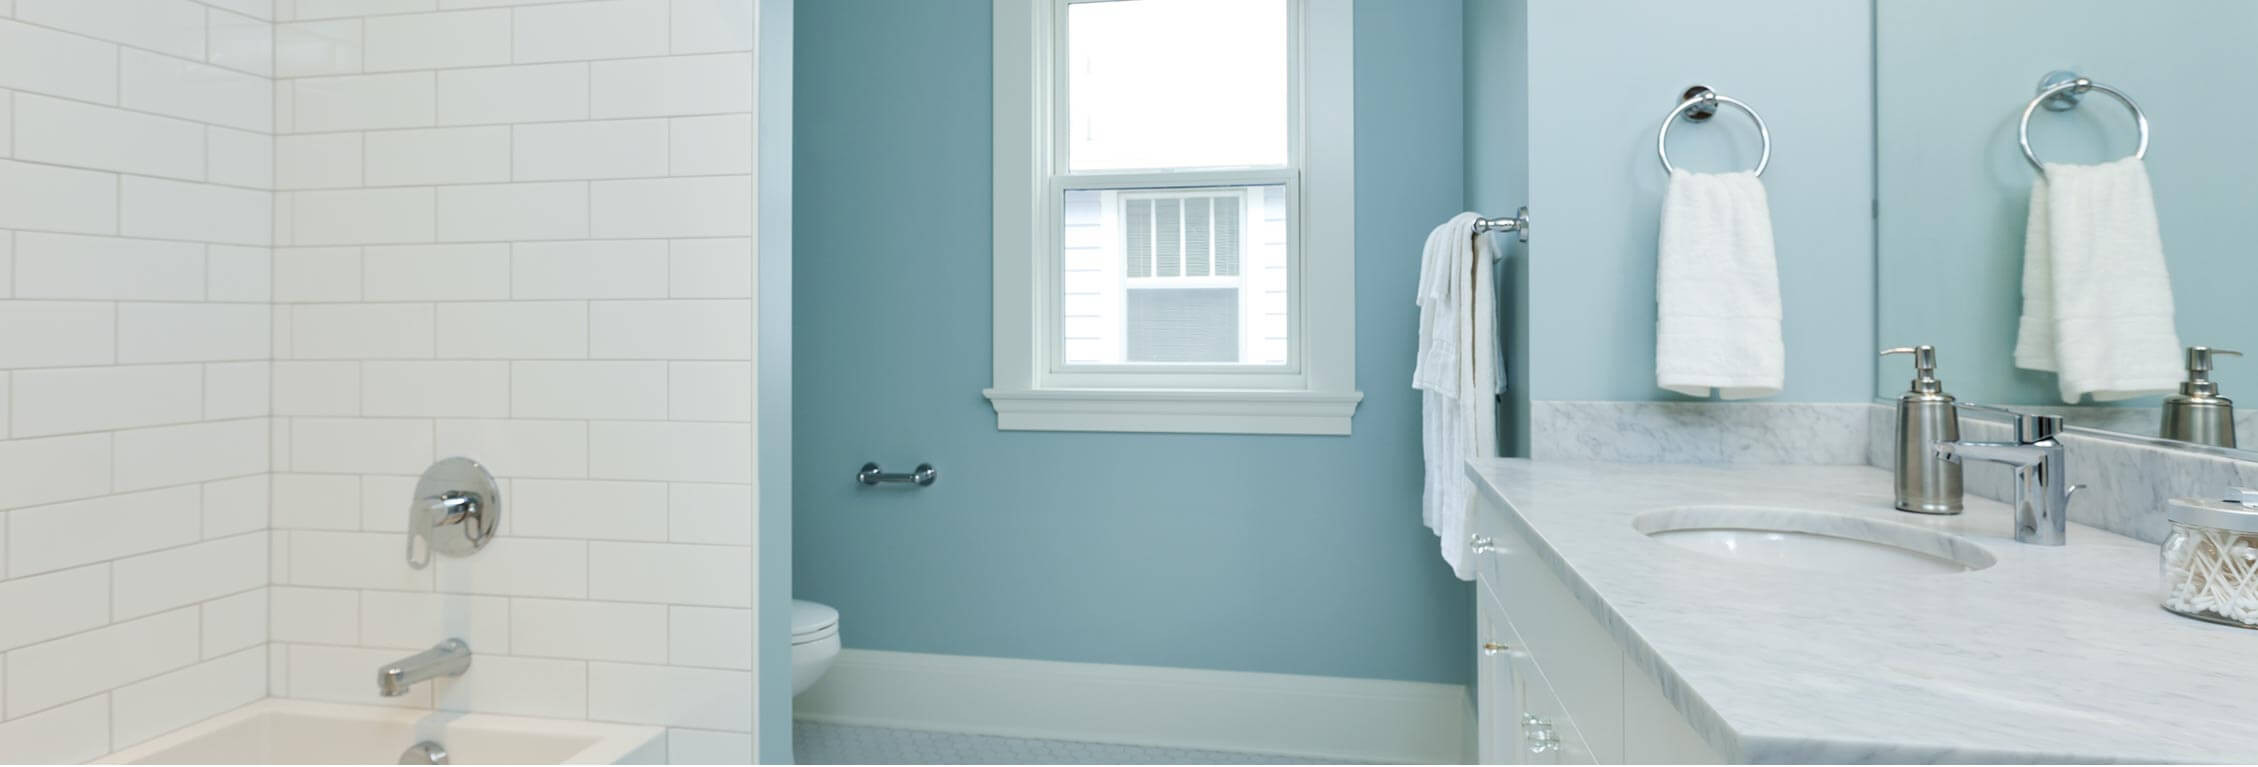 Paint Colors For The Bathroom
 Best Colors to Use in a Small Bathroom Home Decorating